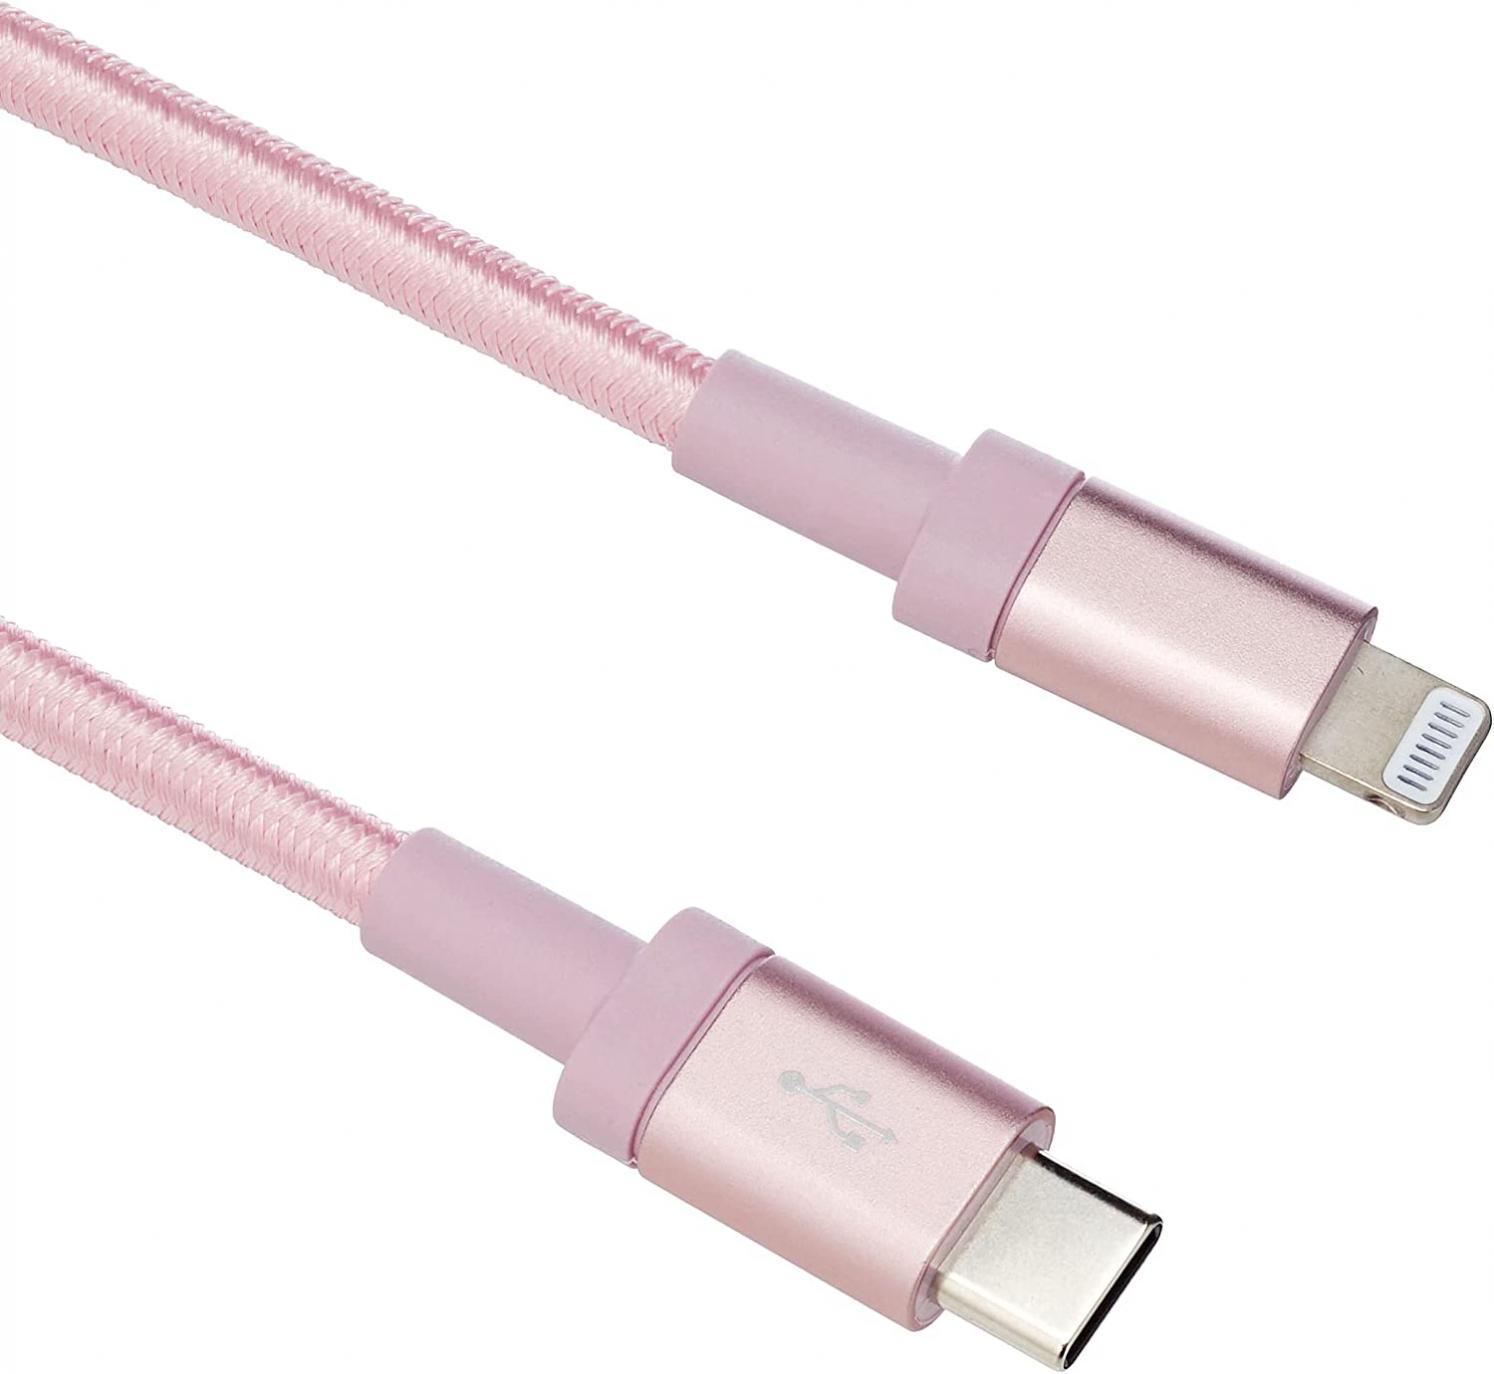 Amazon Basics Nylon Braided USB-C to Lightning Cable, MFi Certified iPhone Charger - Rose Gold, 6-Foot